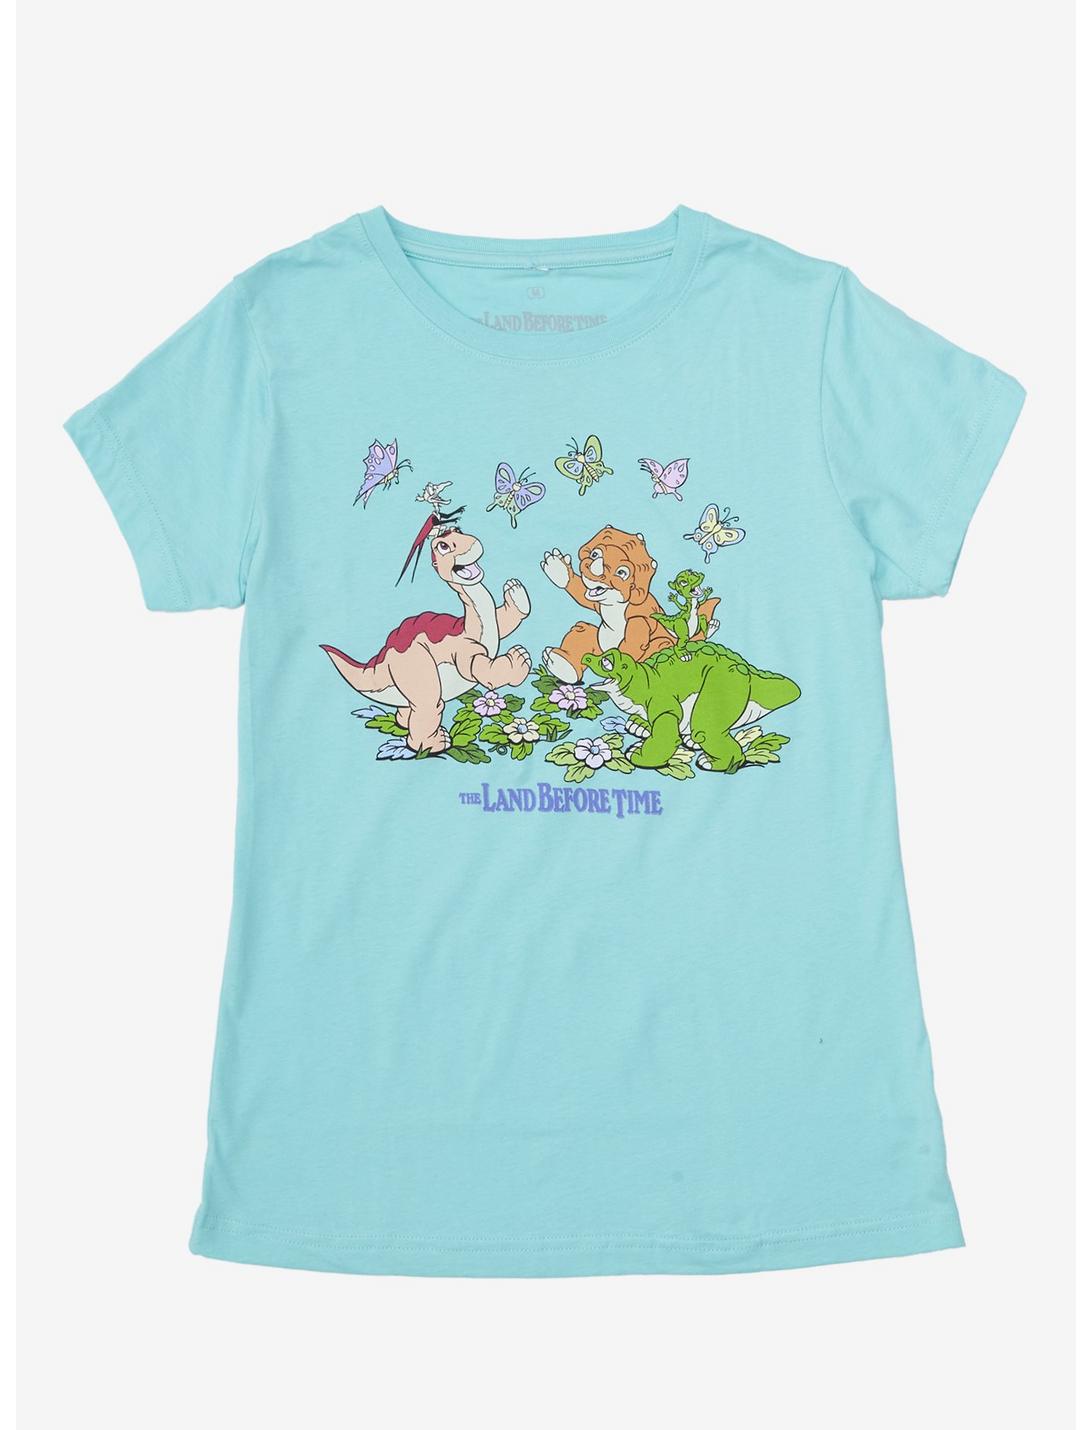 The Land Before Time Group Butterflies Girls T-Shirt, MULTI, hi-res